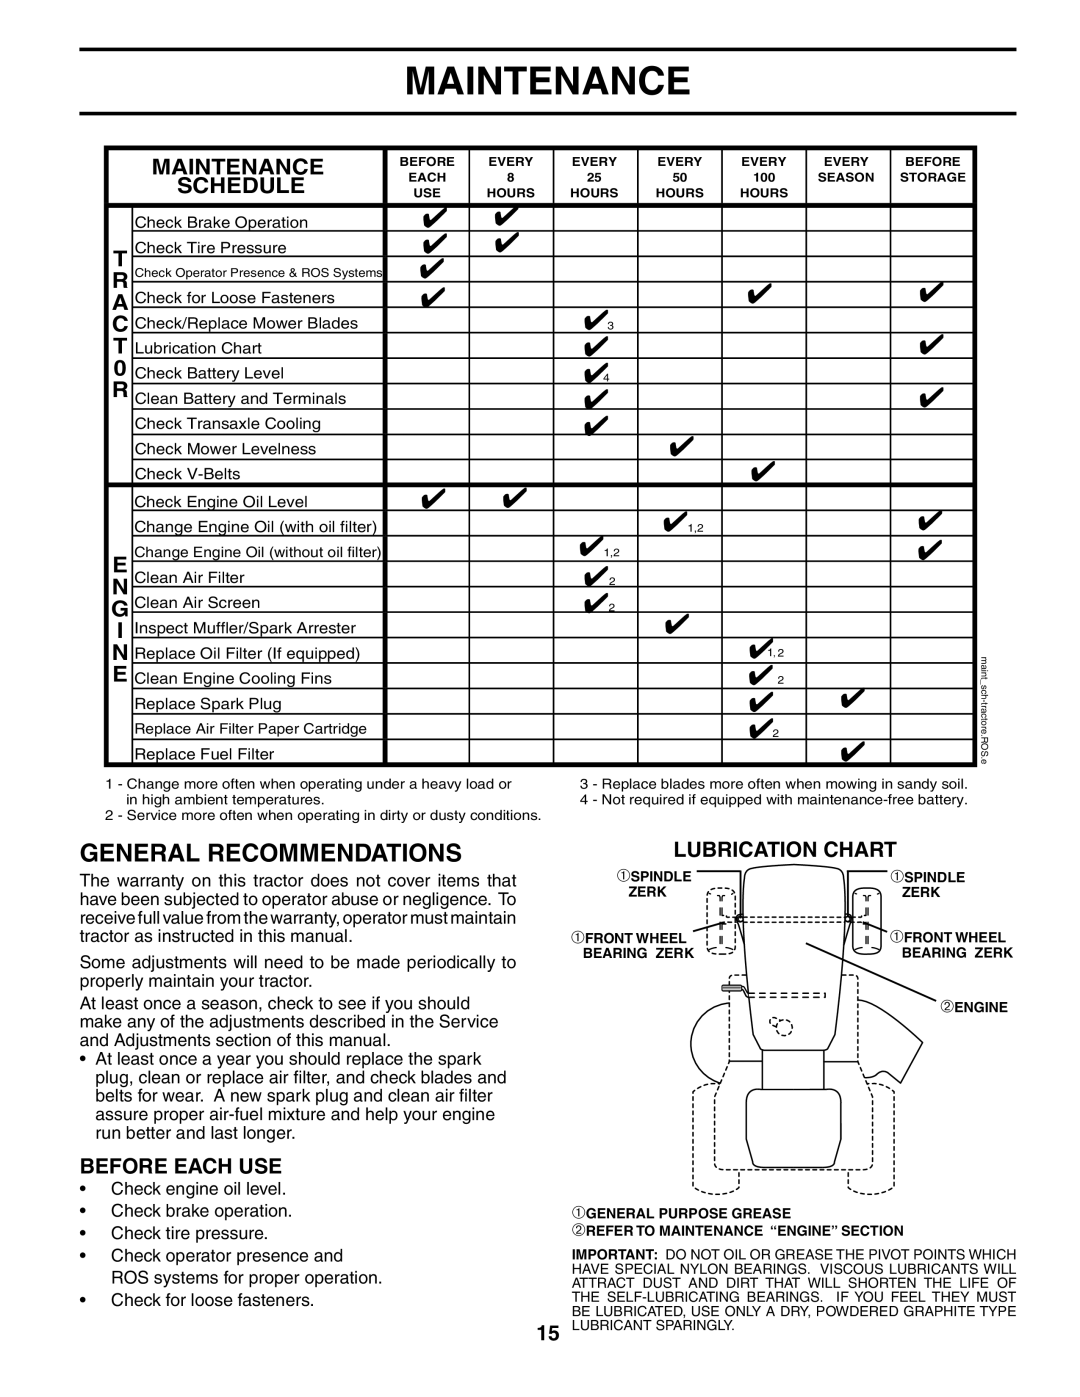 Poulan 403444 manual Maintenance, General Recommendations, Schedule 